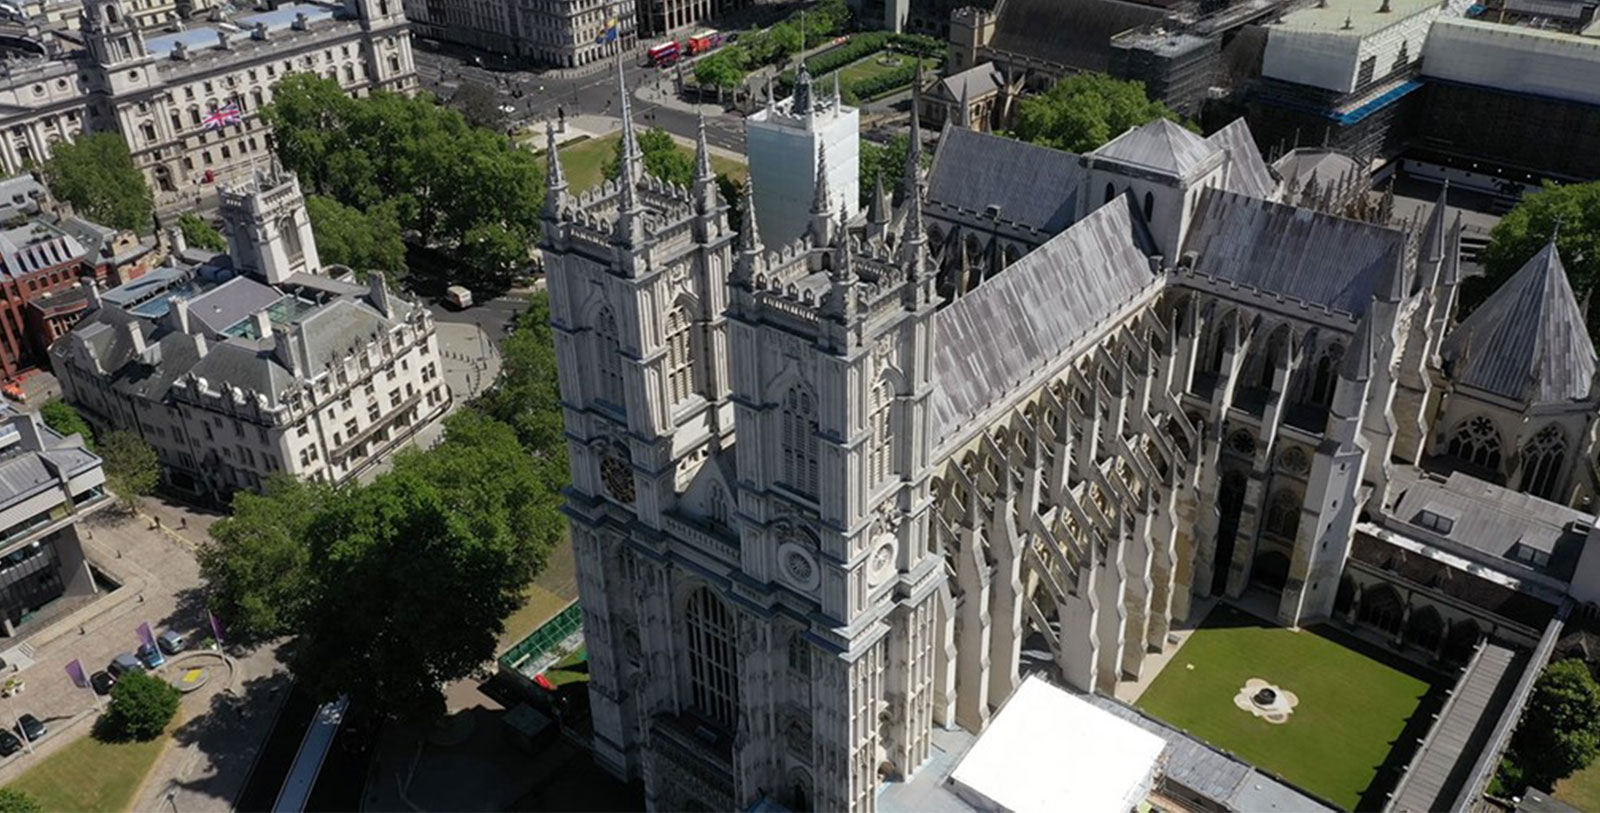 Explore the 10th-century Westminster Abbey nearby.